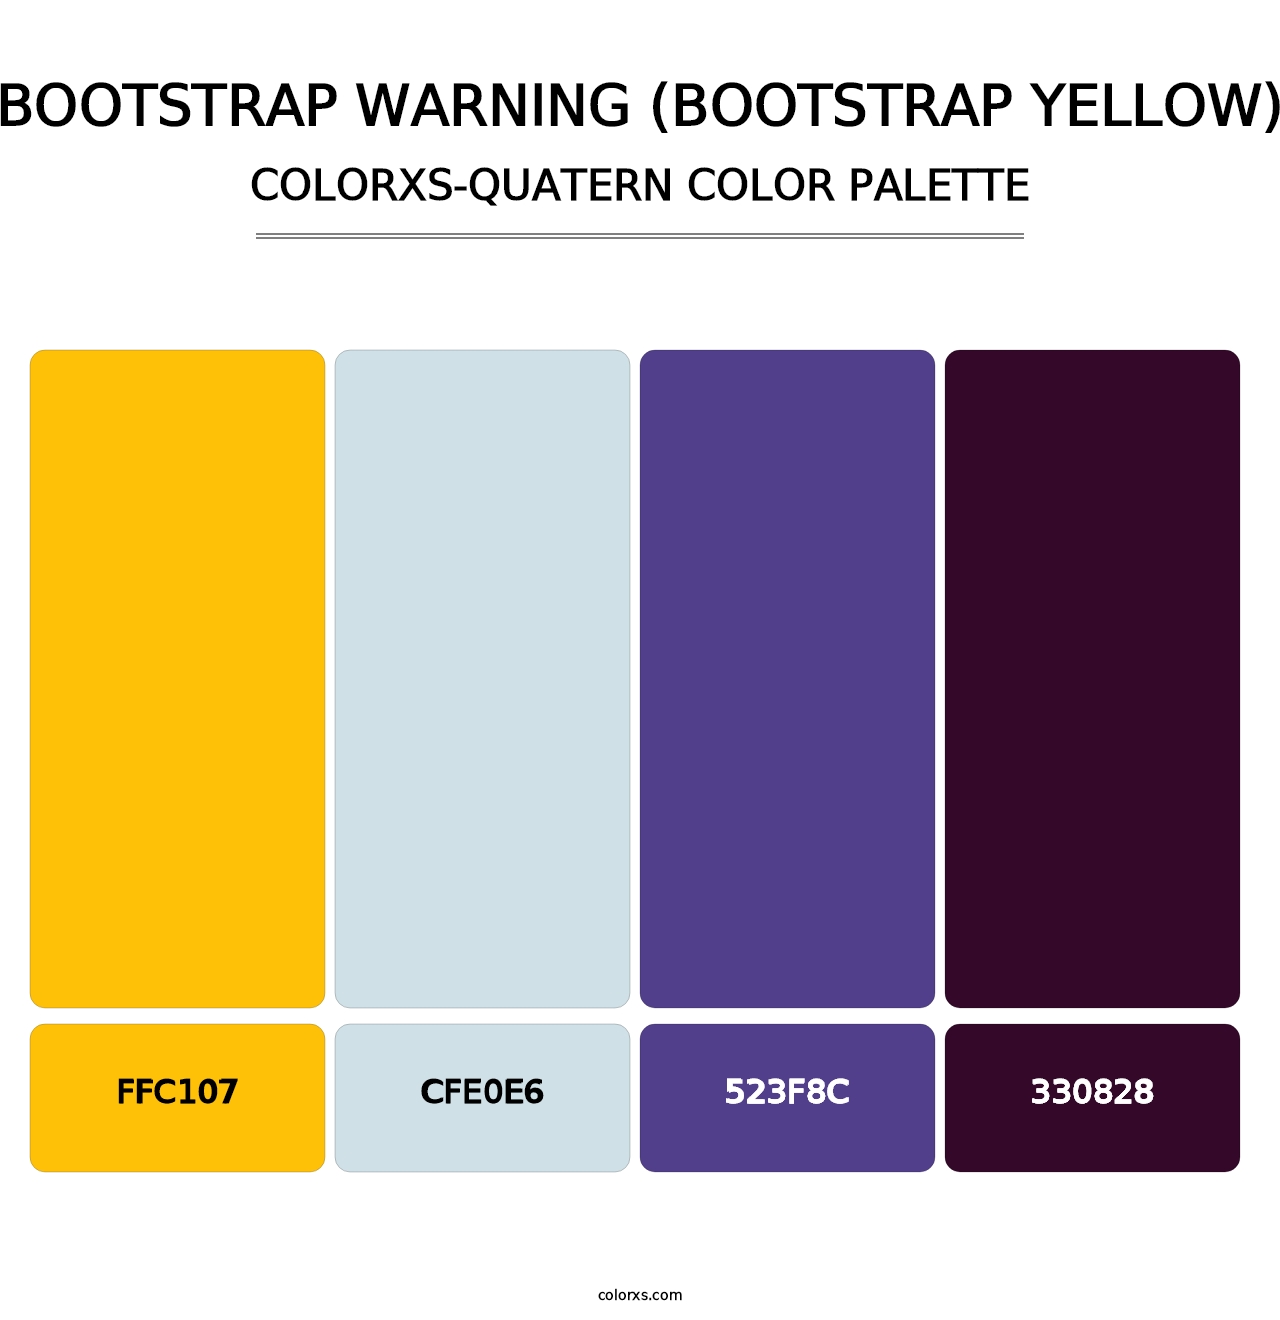 Bootstrap Warning (Bootstrap Yellow) - Colorxs Quatern Palette